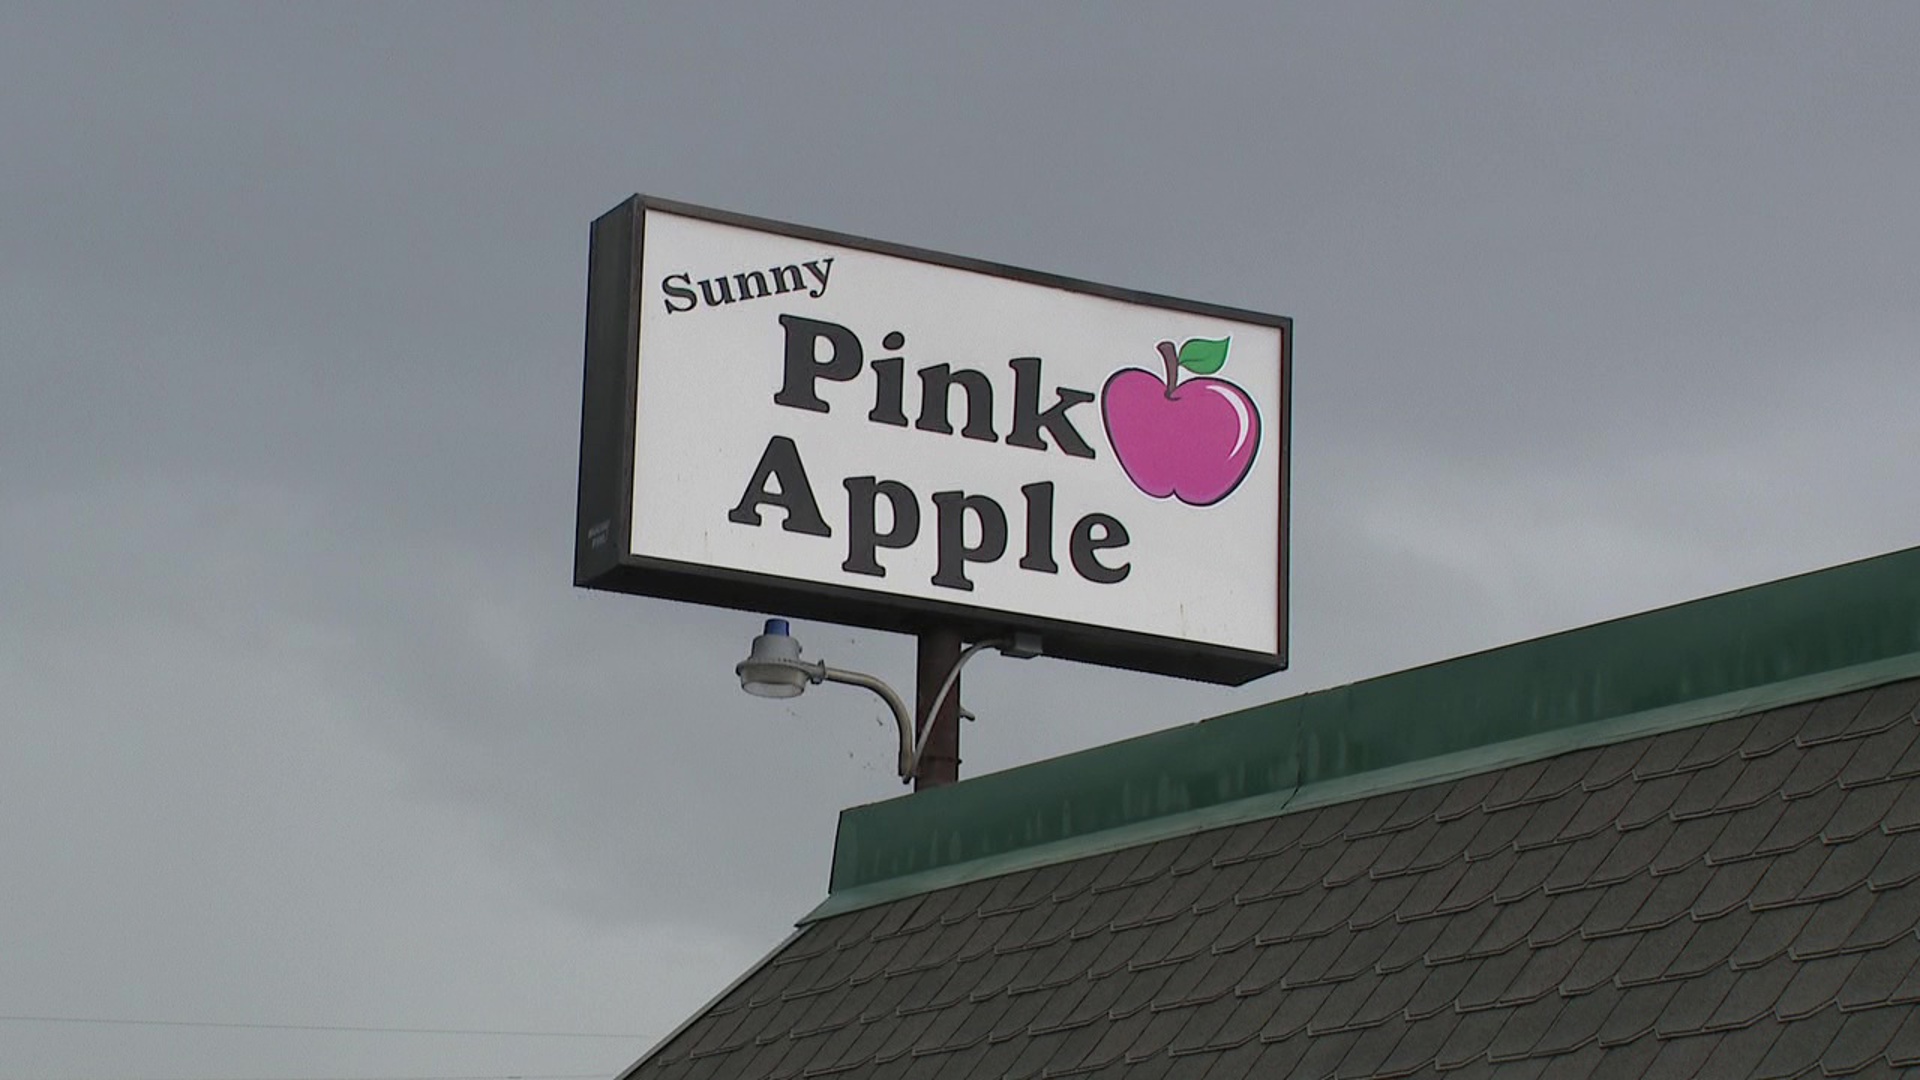 Newswatch 16's Melissa Steininger explains how the well-known Pink Apple is bringing together families in more ways than one.